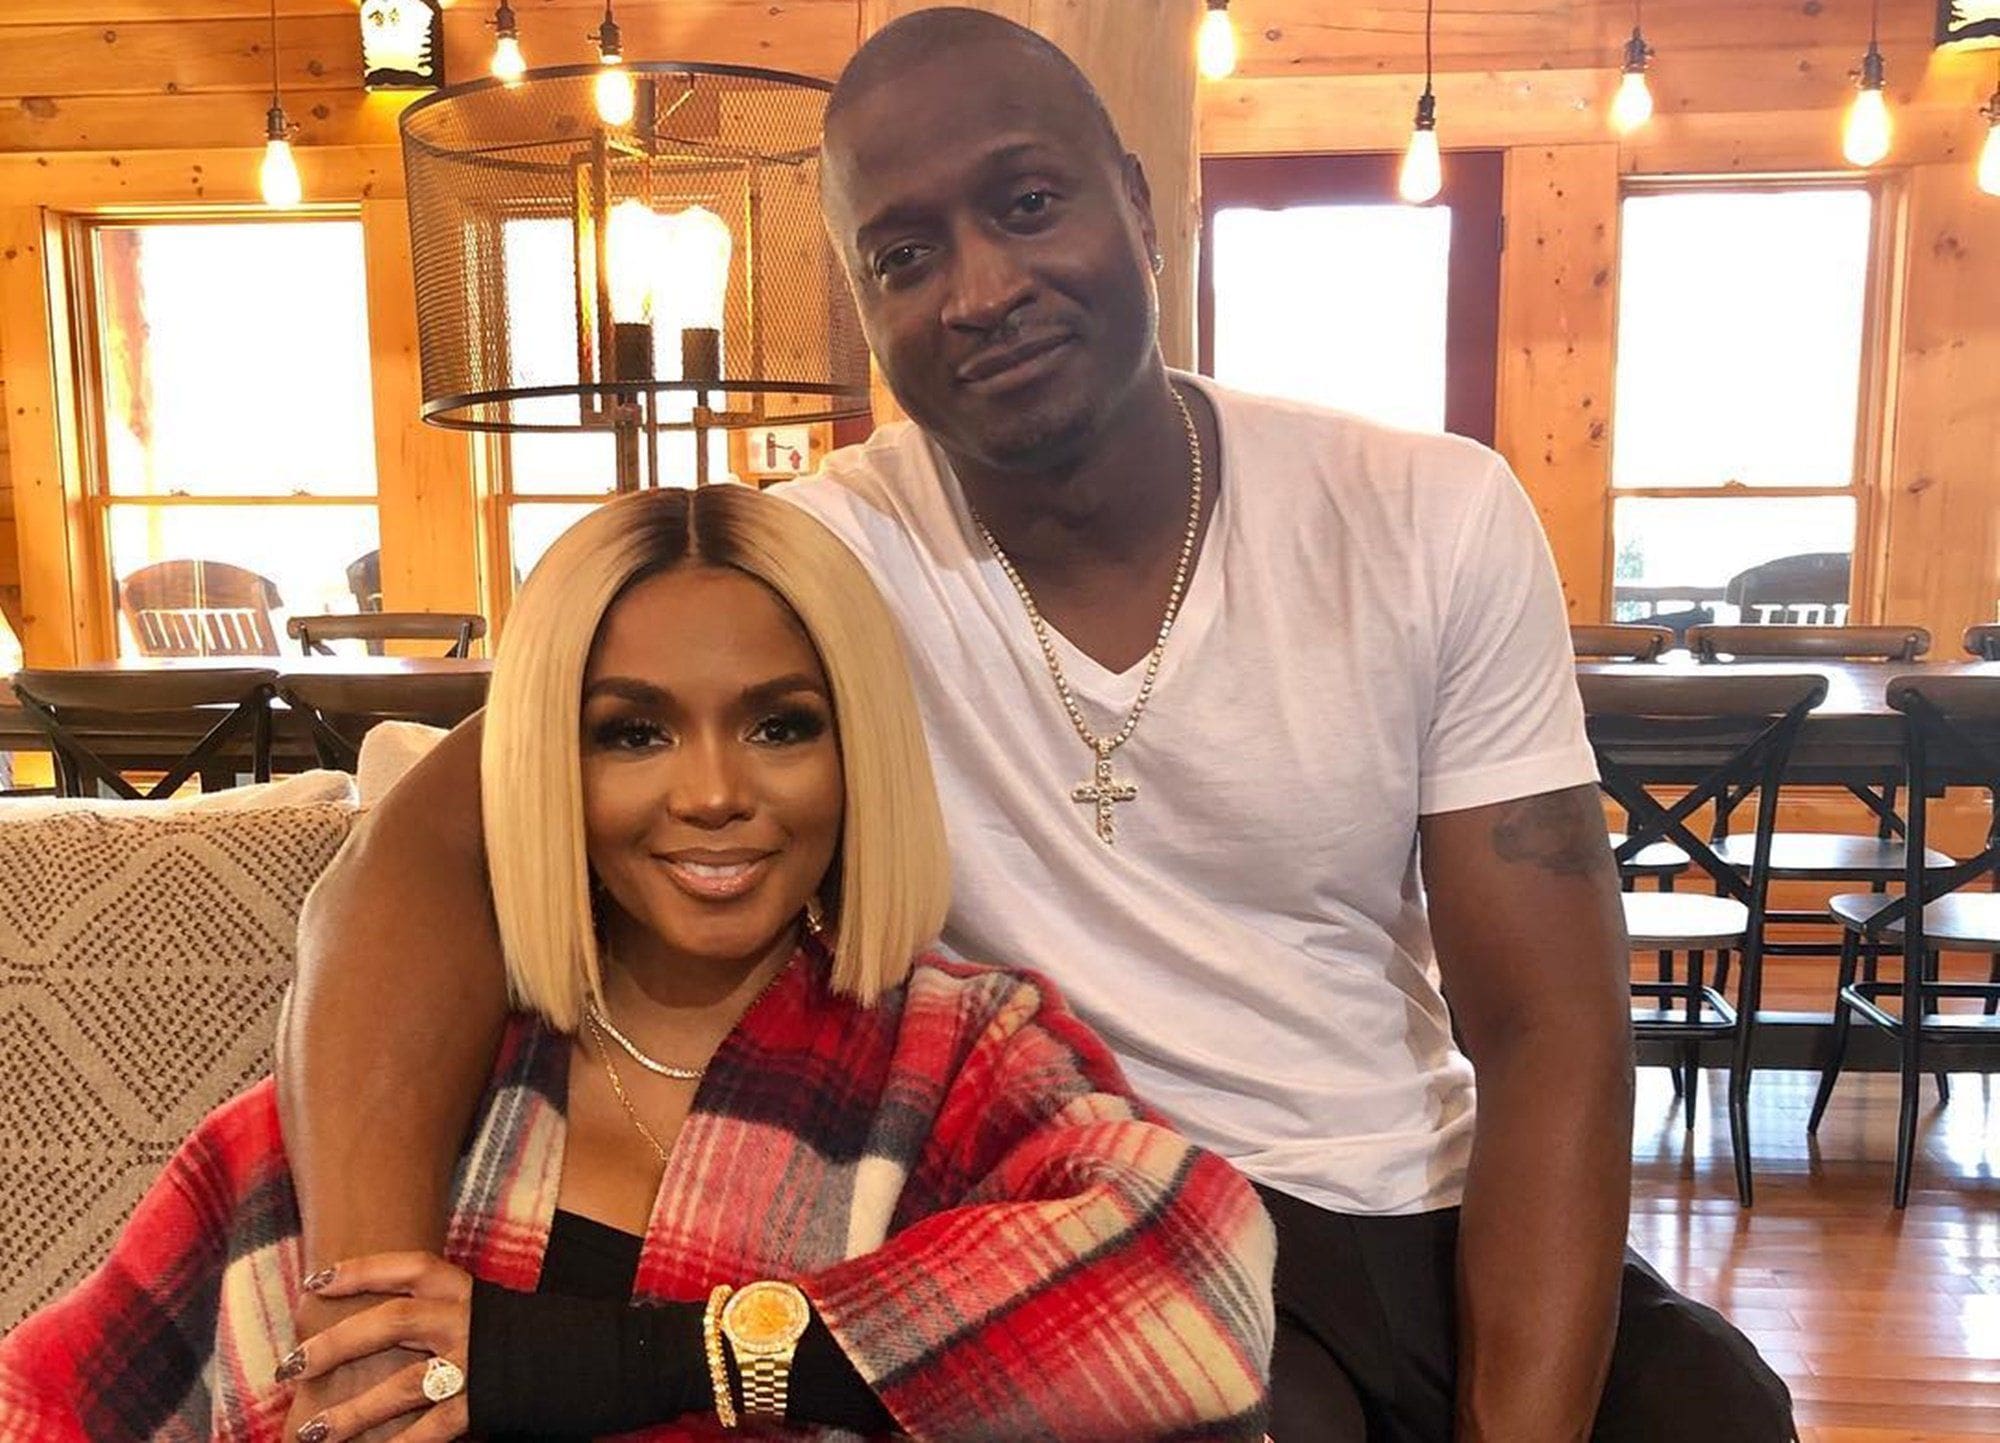 Kirk Frost's Clips Featuring Rasheeda Frost's 84-Year-Old Grandmother Has Fans In Awe - Check Out The Funny Lady!